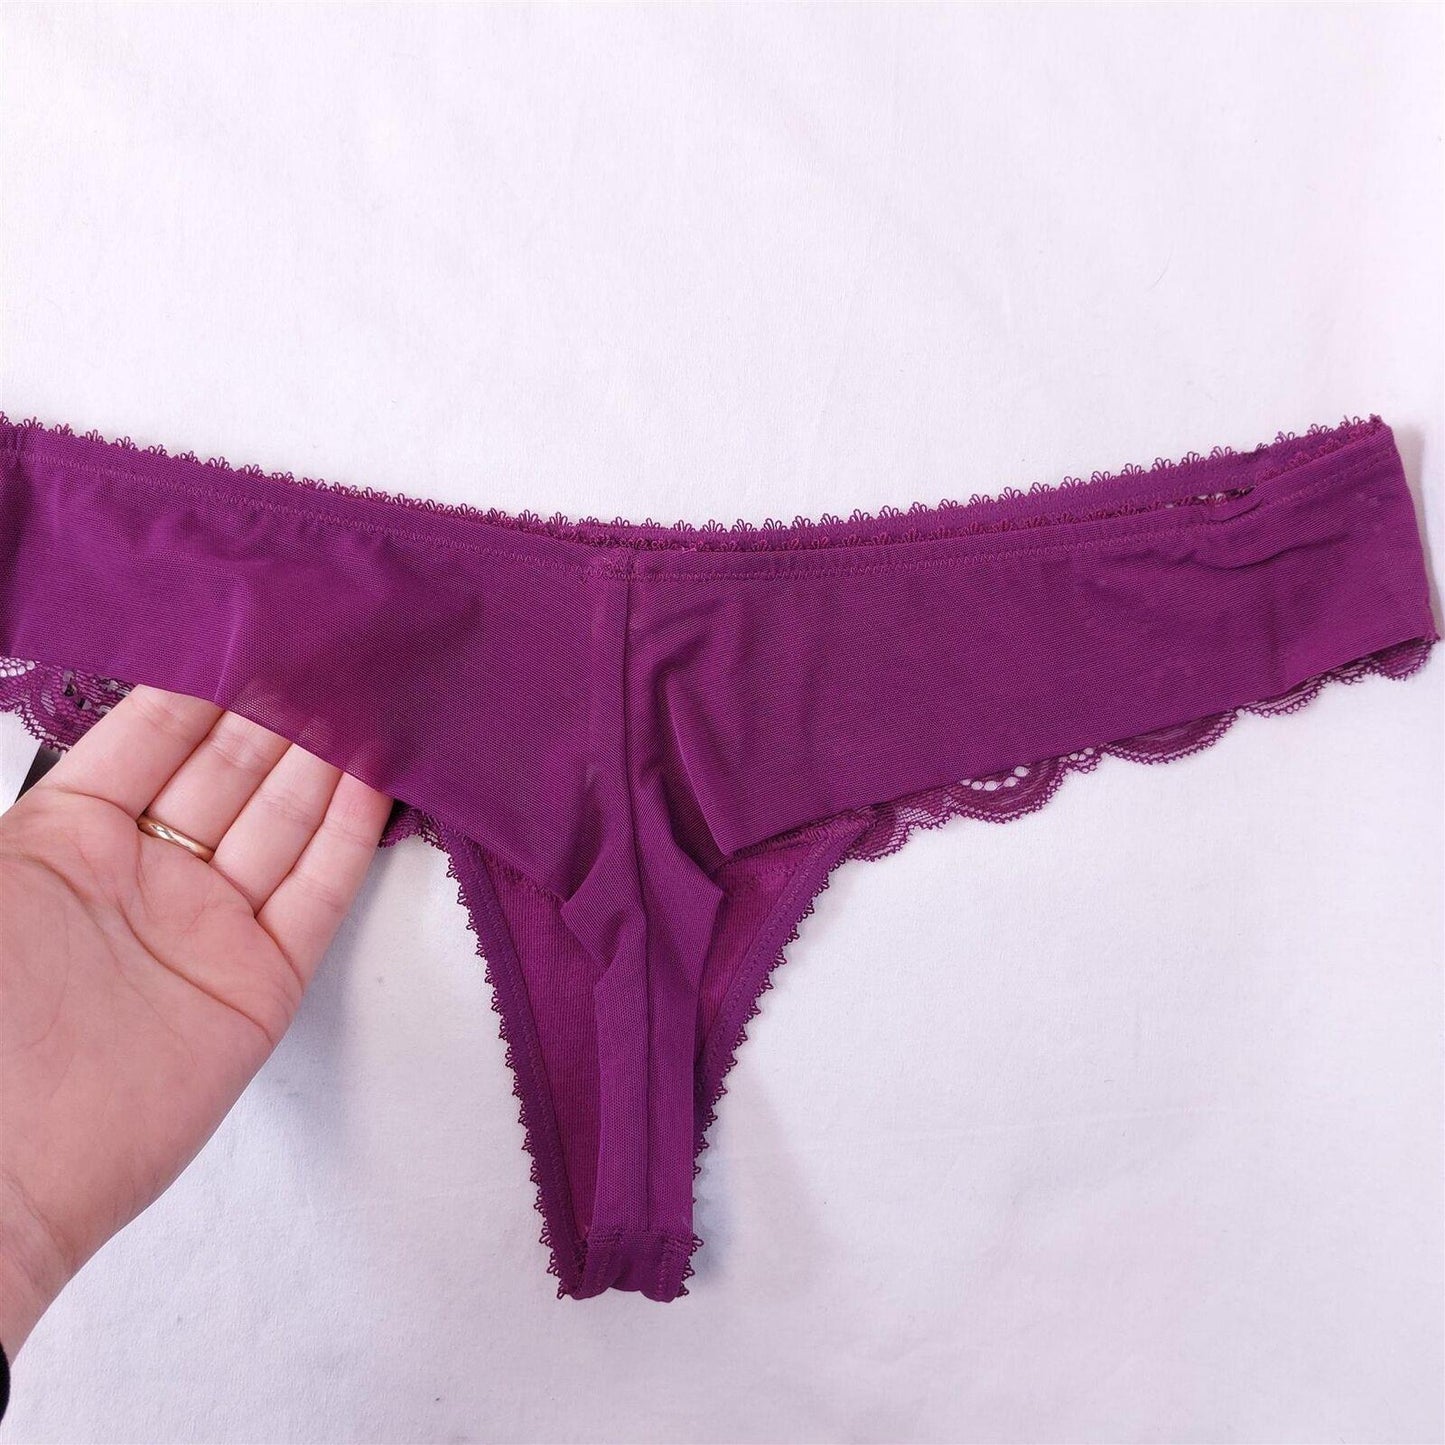 2-Pack Gossard Lace Thong Knickers Multipack Size 8-10 Purple Multipack New